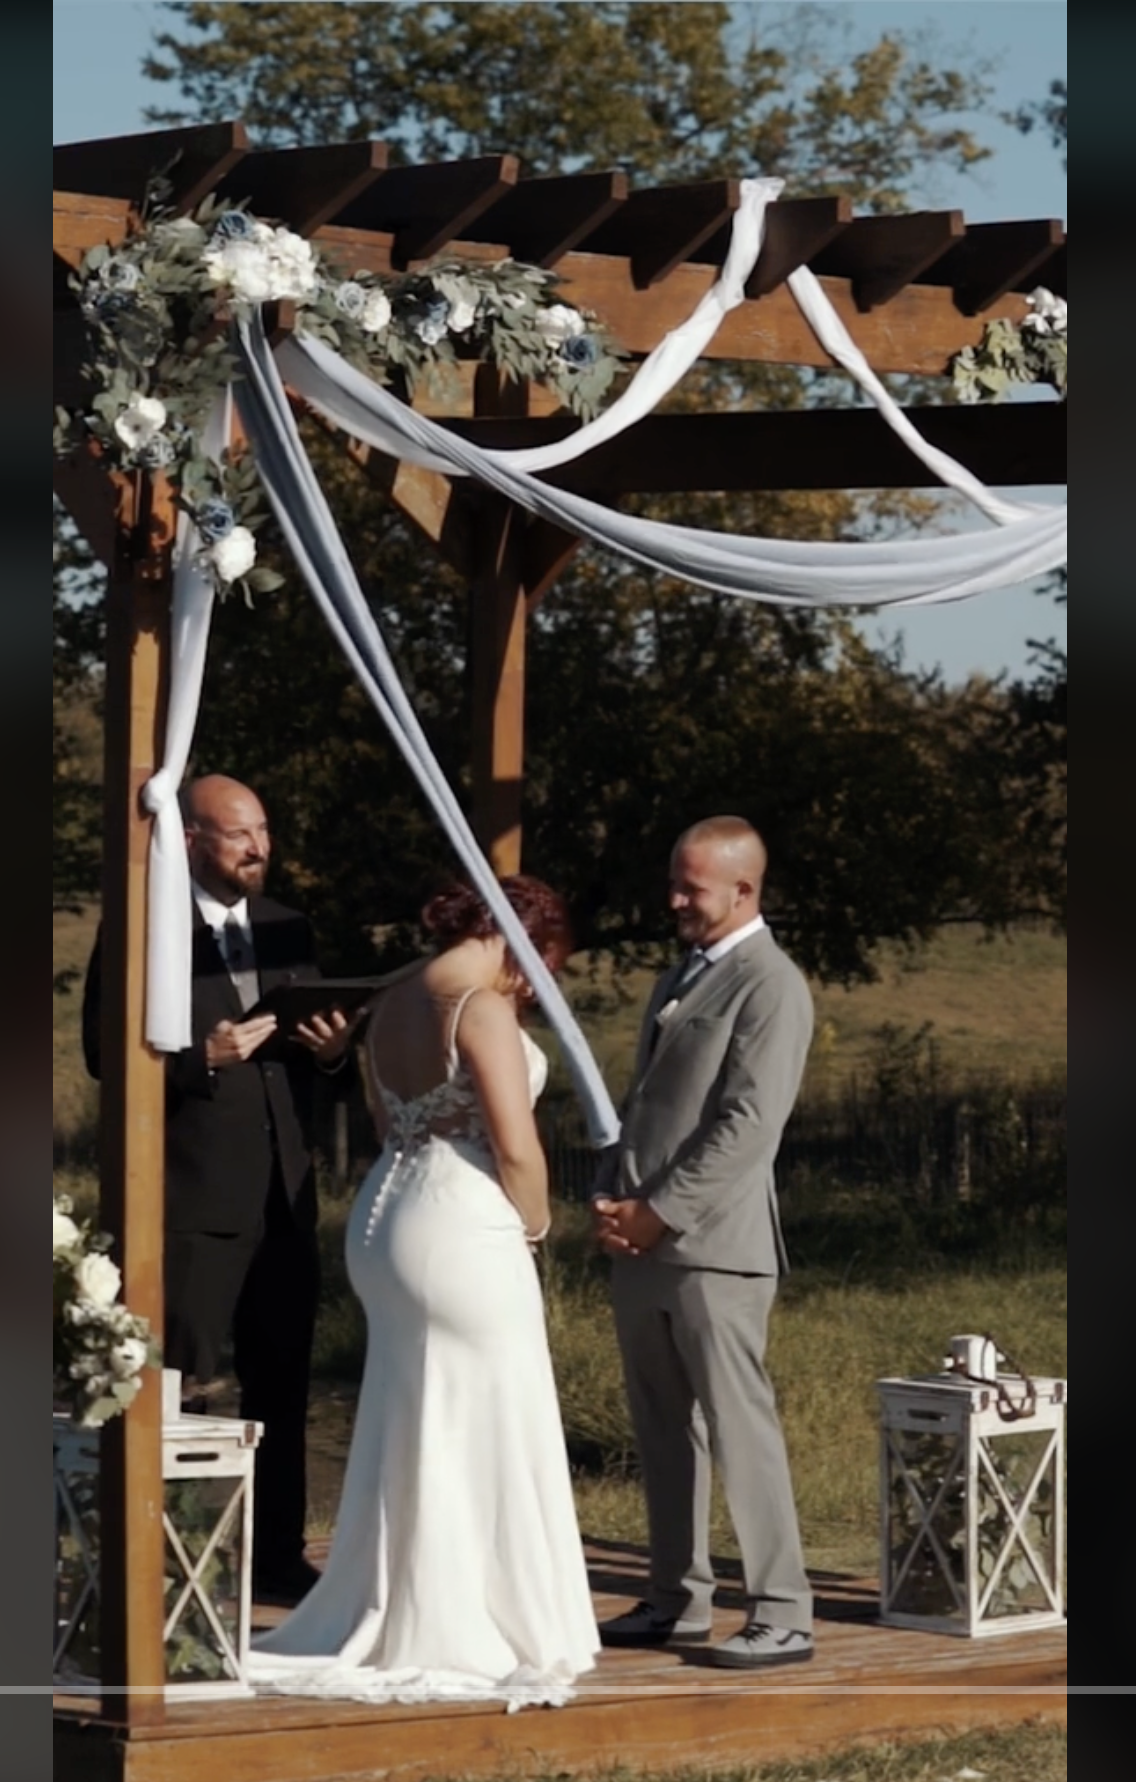 Kaitlin and Cody Sheehan at the altar, as seen in a video dated December 14, 2023 | Source: tiktok.com/@ckentertainmentservices